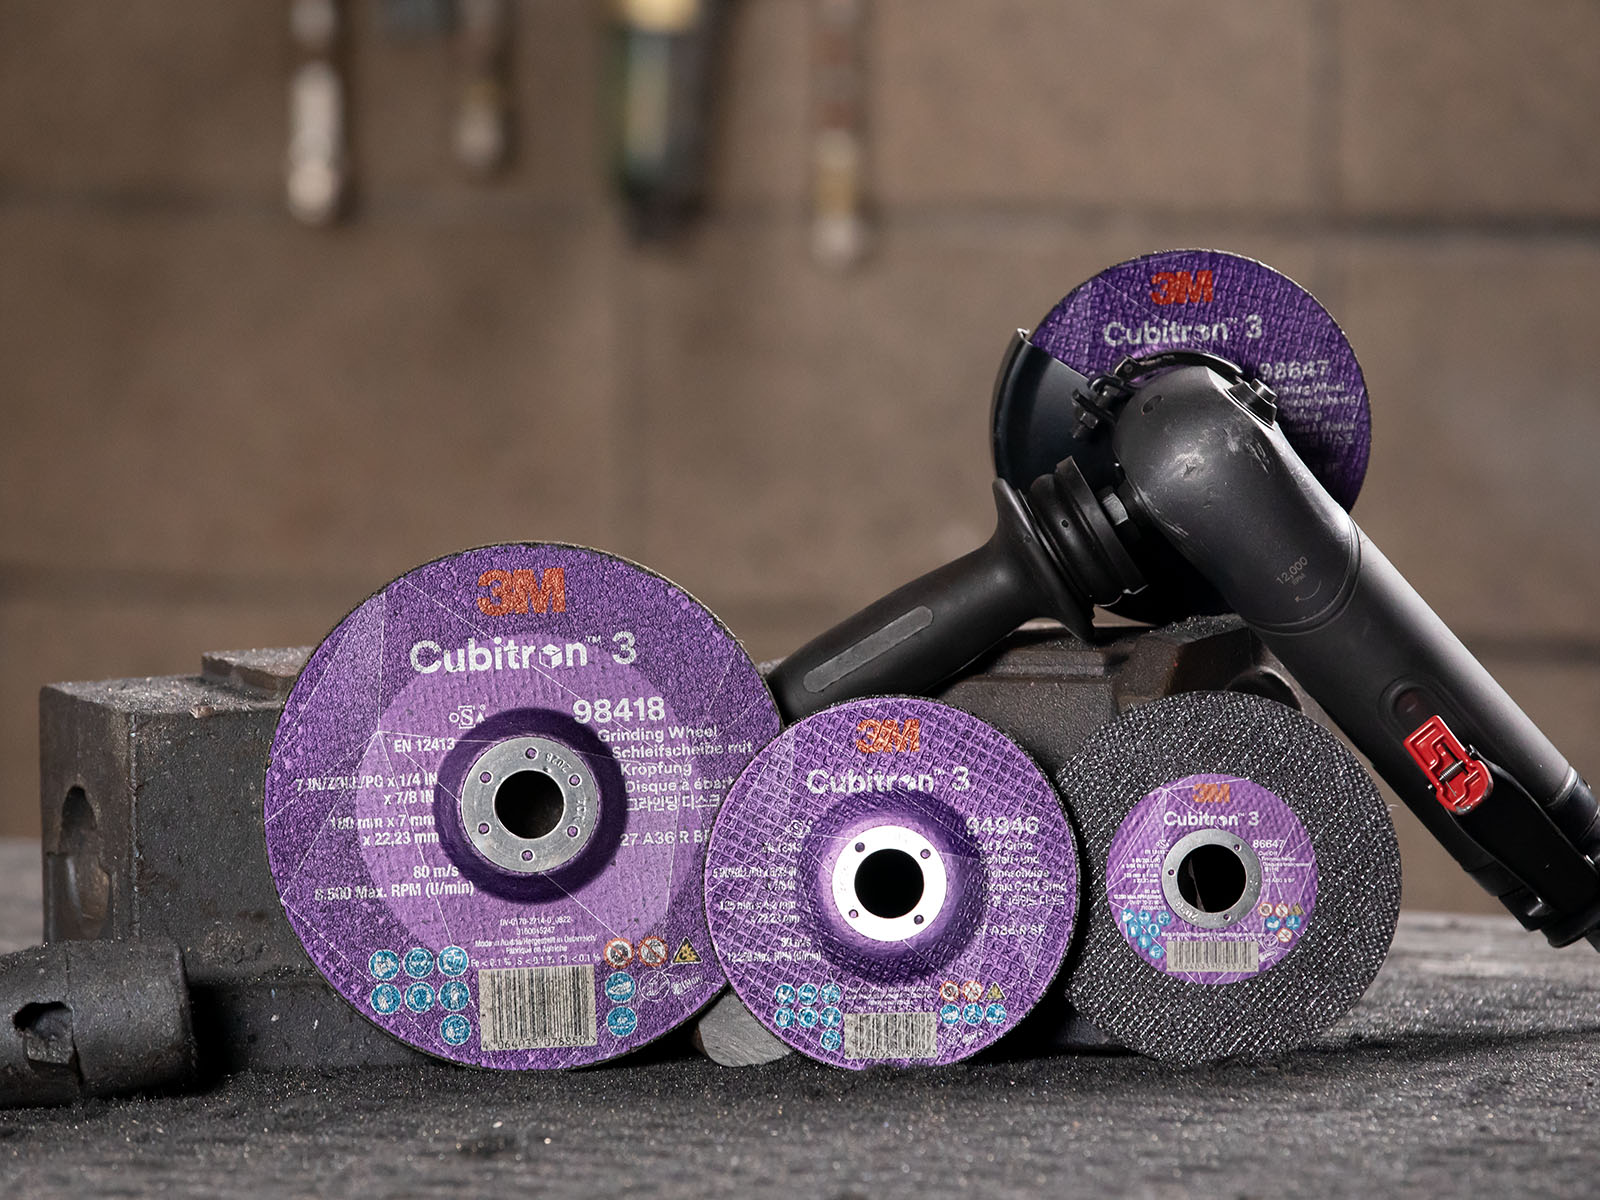 3M™ Cubitron™ 3 Performance Abrasives—including Depressed Center Grinding Wheels, Cut and Grind Wheels and Cut-Off Wheels—feature a reengineered precision-shaped ceramic triangular grain to improve cut rate and extend life. (Photo courtesy of 3M)